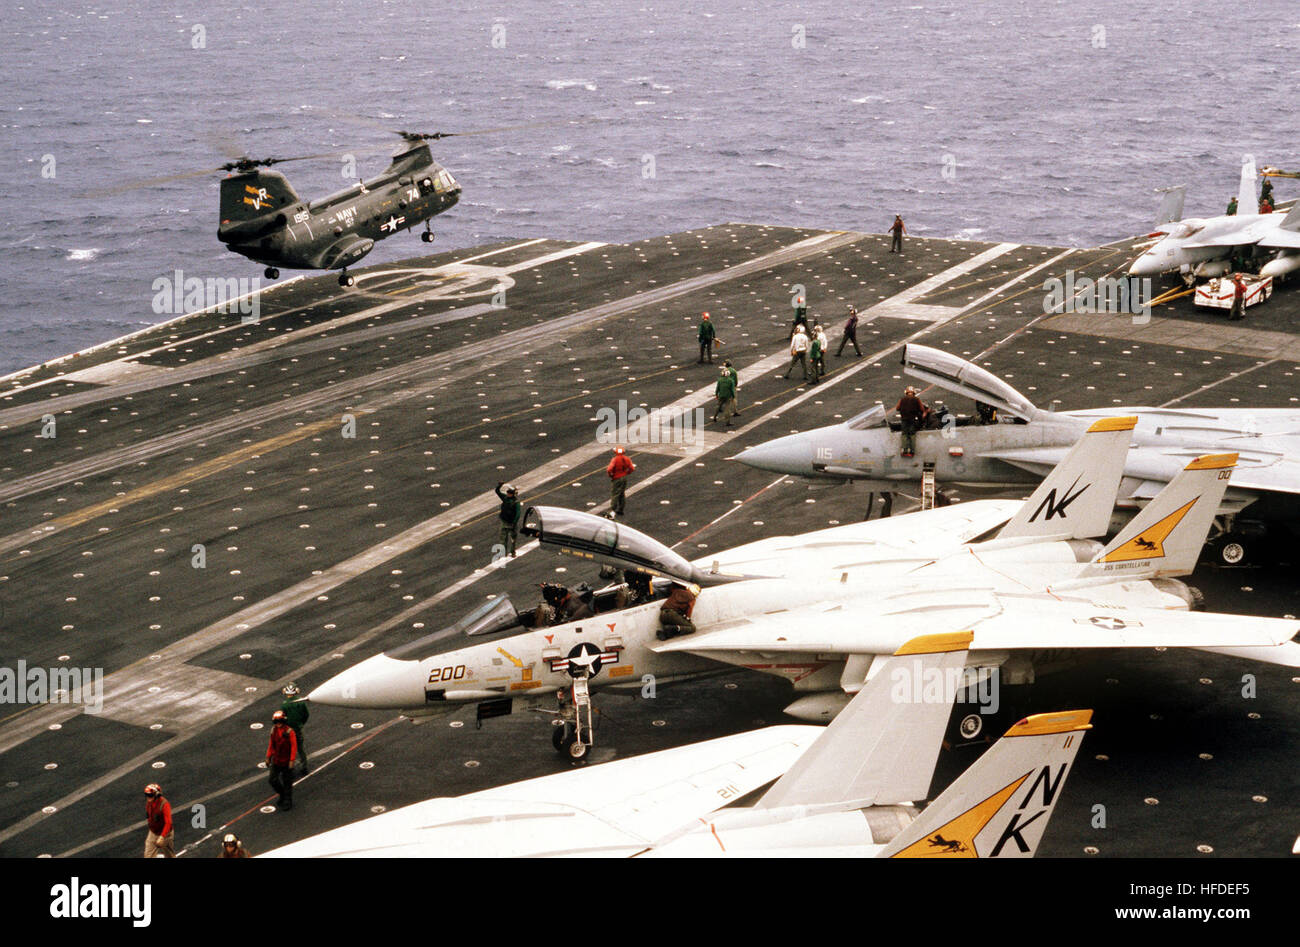 A UH-46D Sea Knight helicopter from the ammunition ship USS KISKA (AE 35) hovers above the flight deck of the aircraft carrier USS CONSTELLATION (CV 64) during Fleet Exercise 85.  In the foreground are several F-14A Tomcat aircraft from Fighter Squadron 21.  On the far right is an F/A-18A Hornet aircraft. UH-46D landing on USS Constellation (CV-64) 1984 Stock Photo